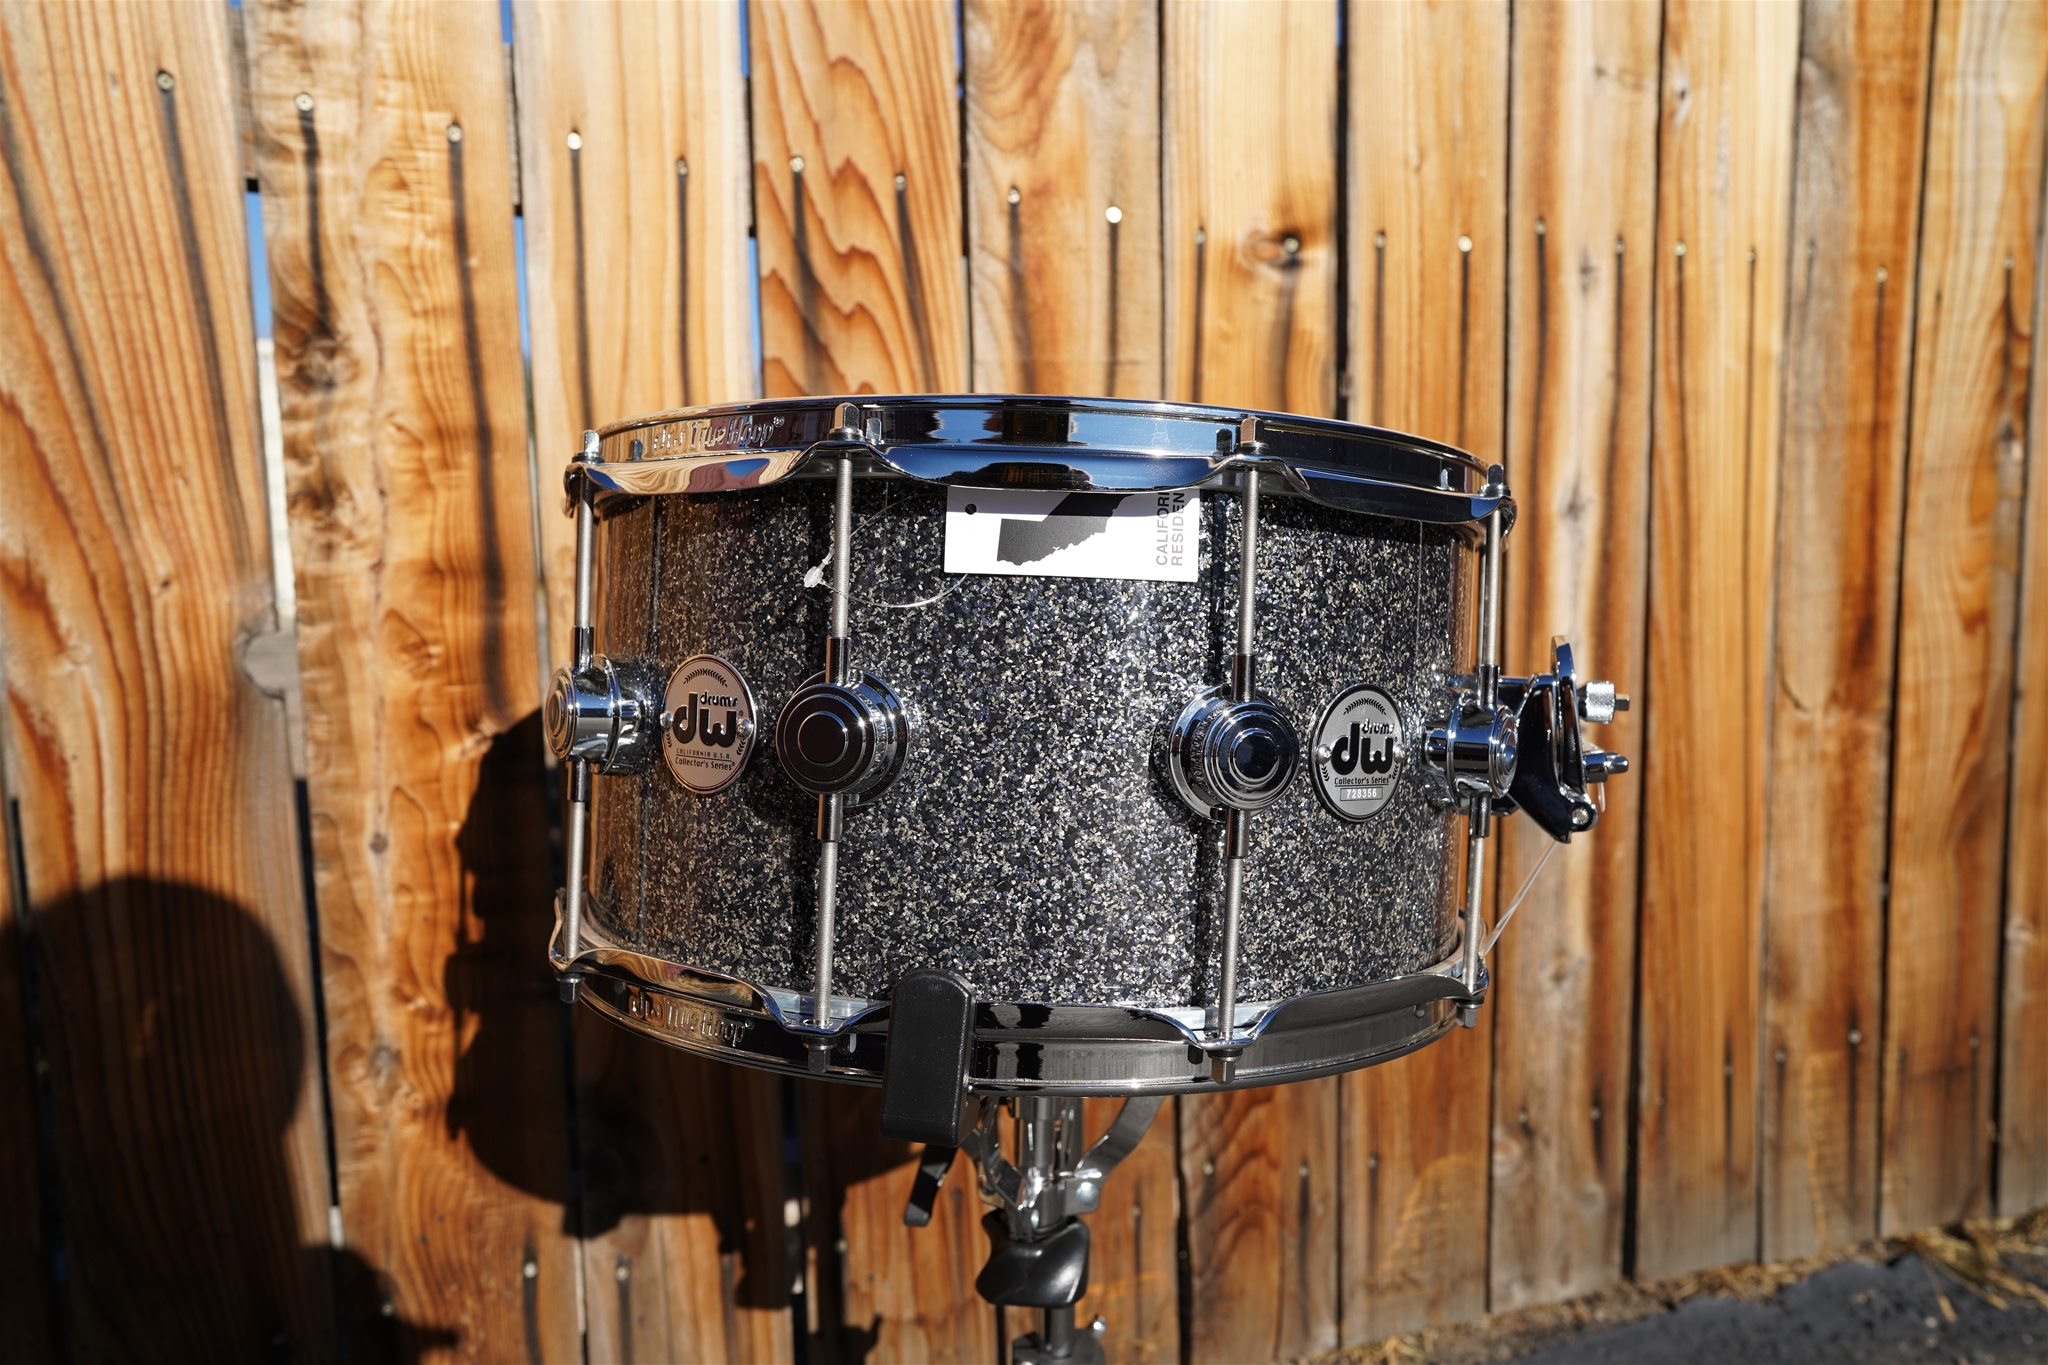 DW USA Collectors Series - Black Galaxy Finish ply - 7 x 14" Pure Maple SSC/VLT Shell With Ring's Snare Drum